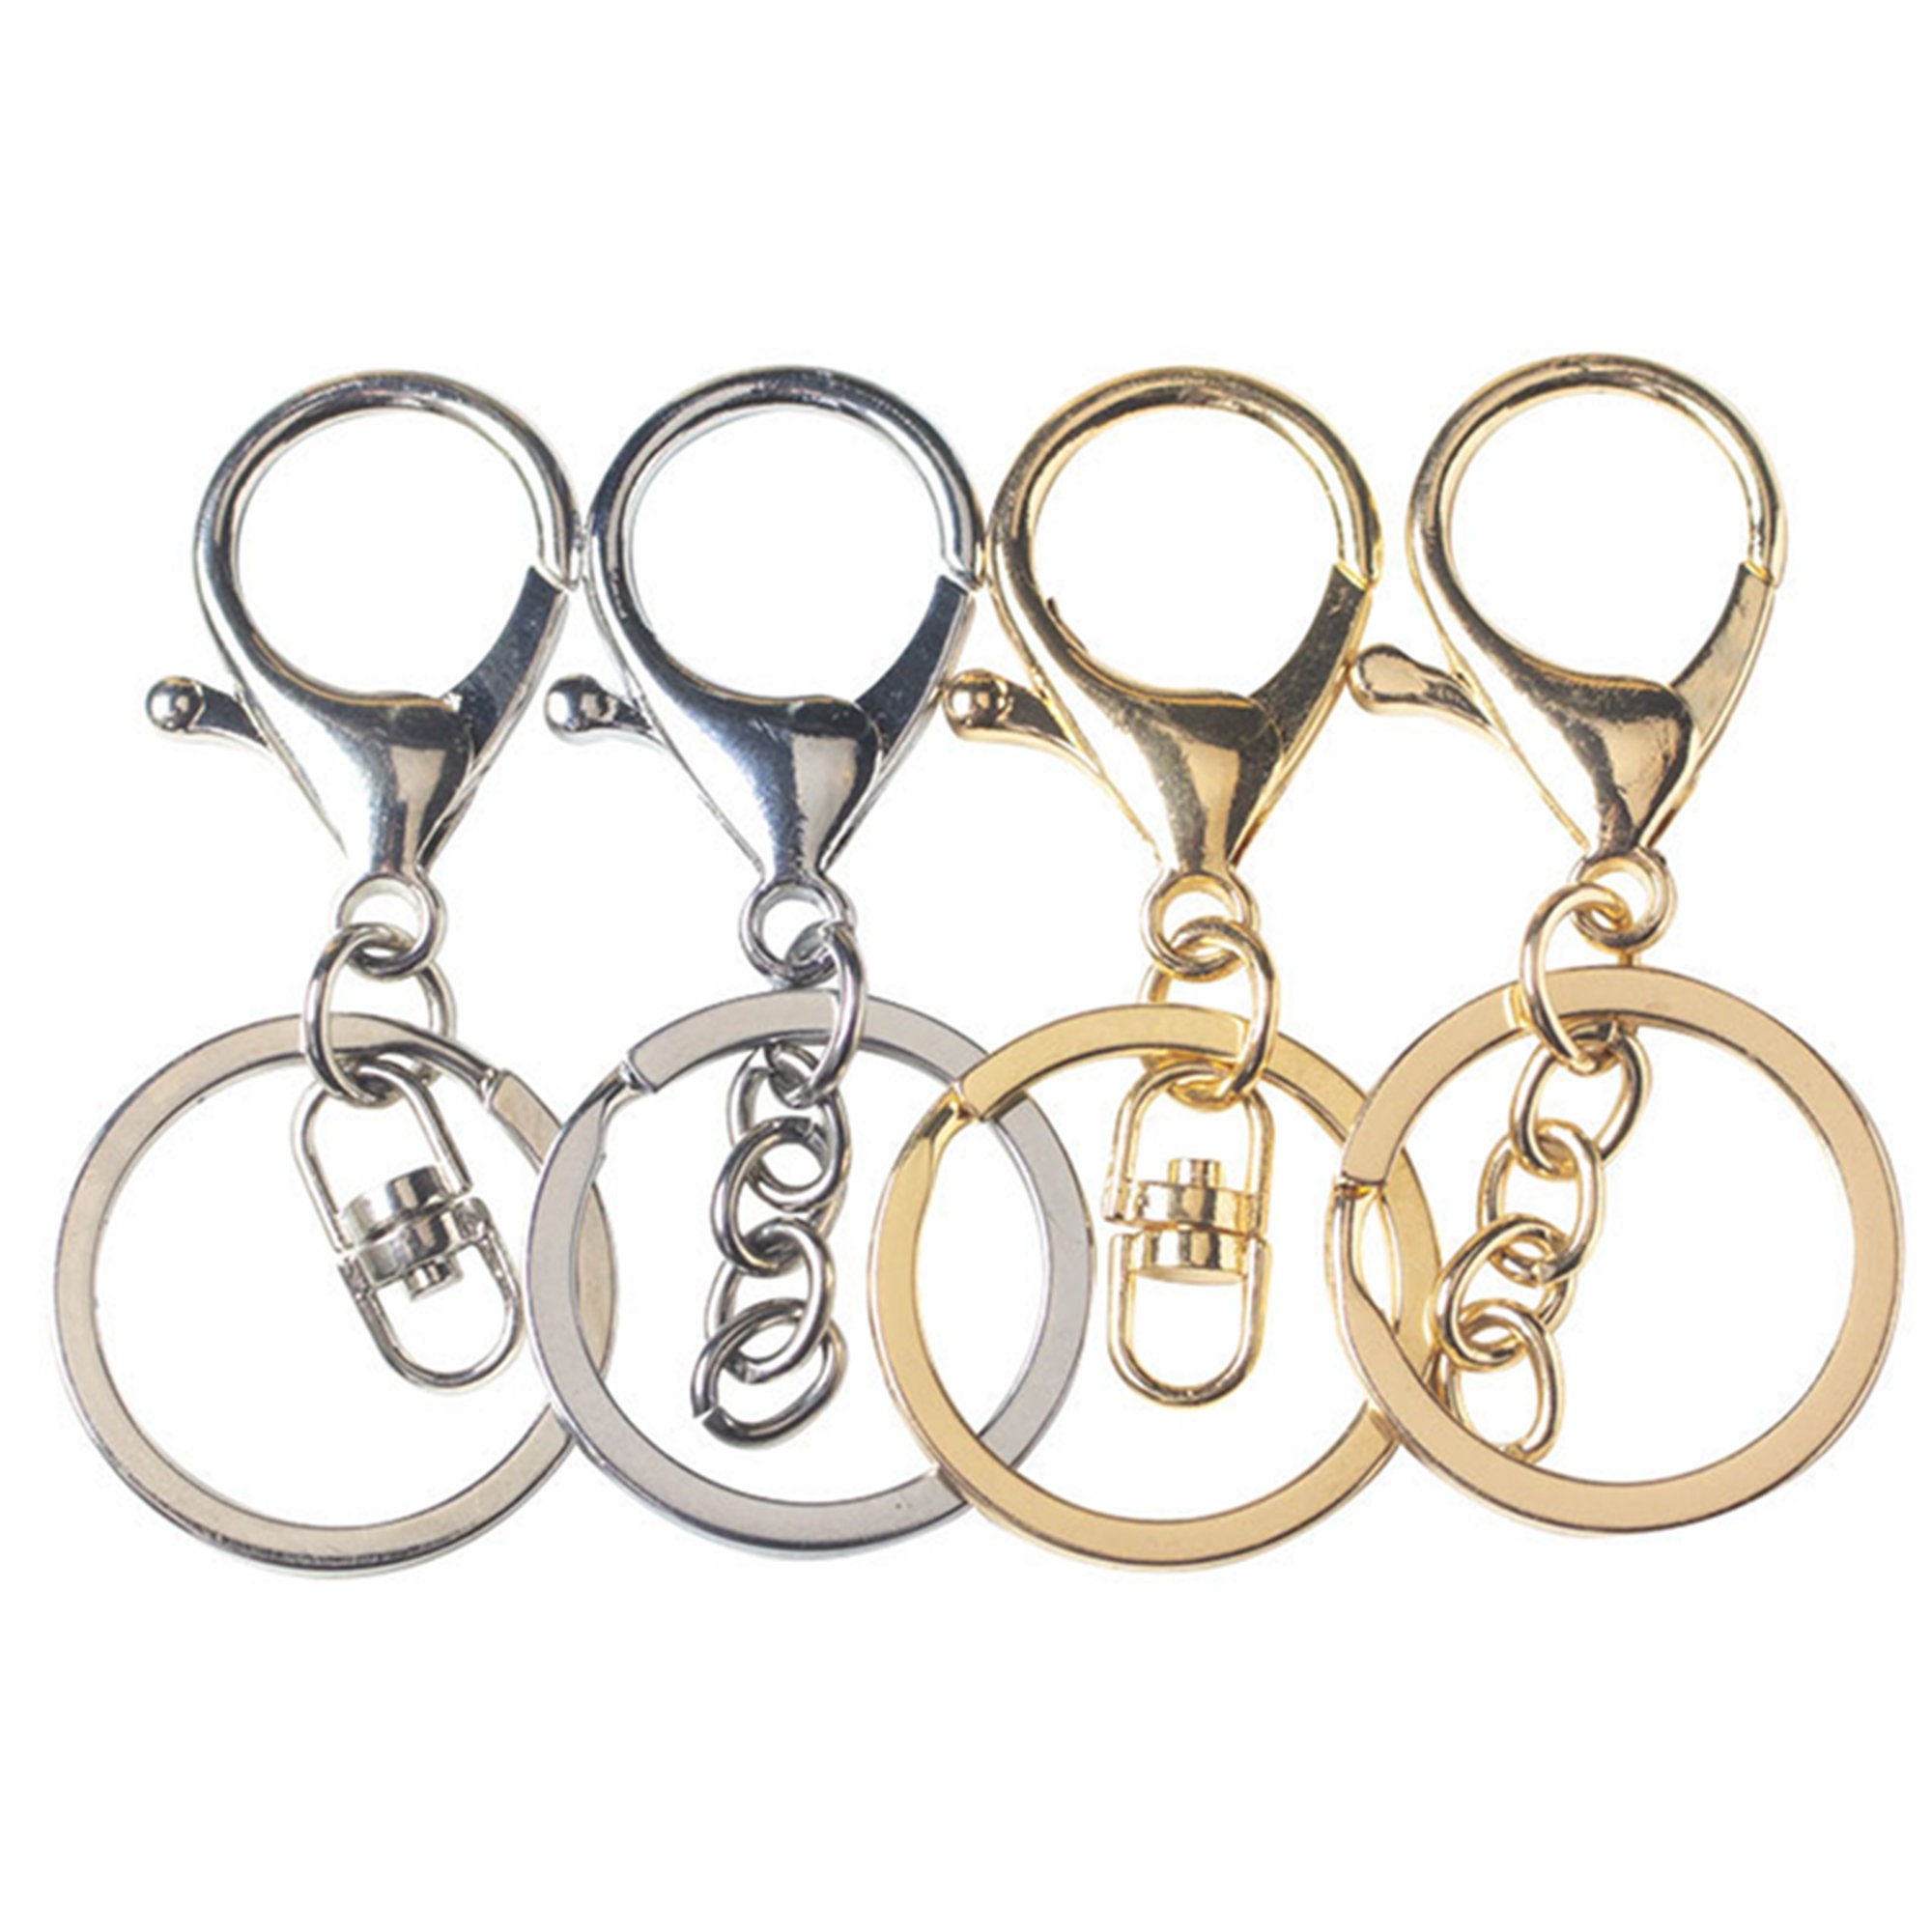 Gold Lobster Clasp Keychain Ring- 2pcs/lot